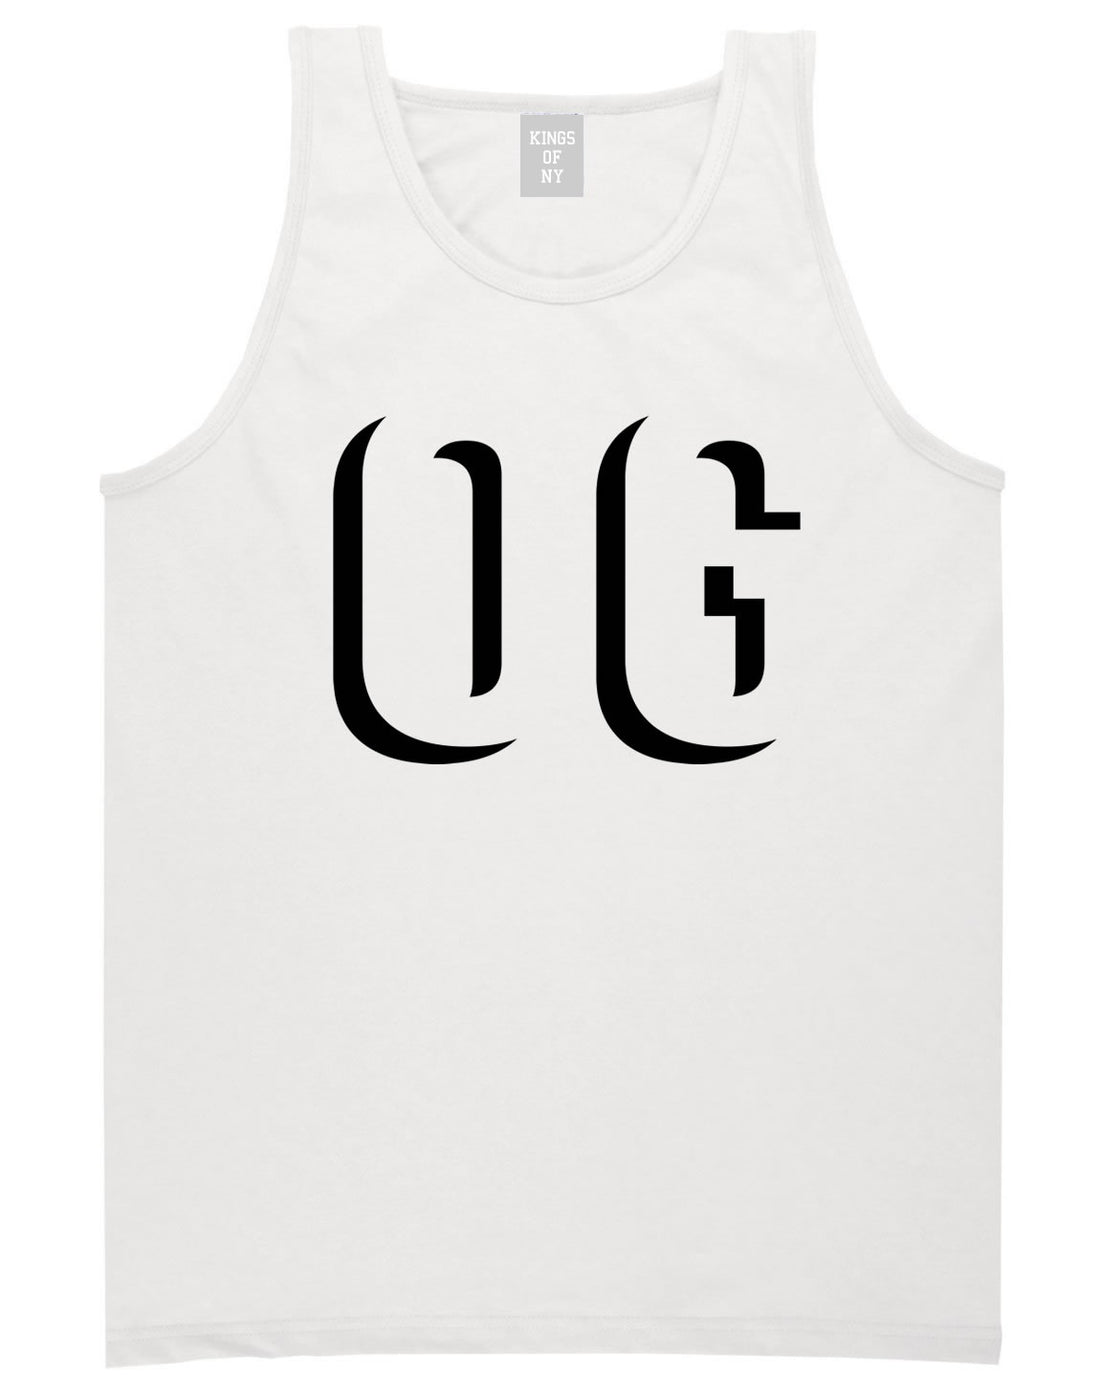 OG Shadow Originial Gangster Tank Top in White by Kings Of NY